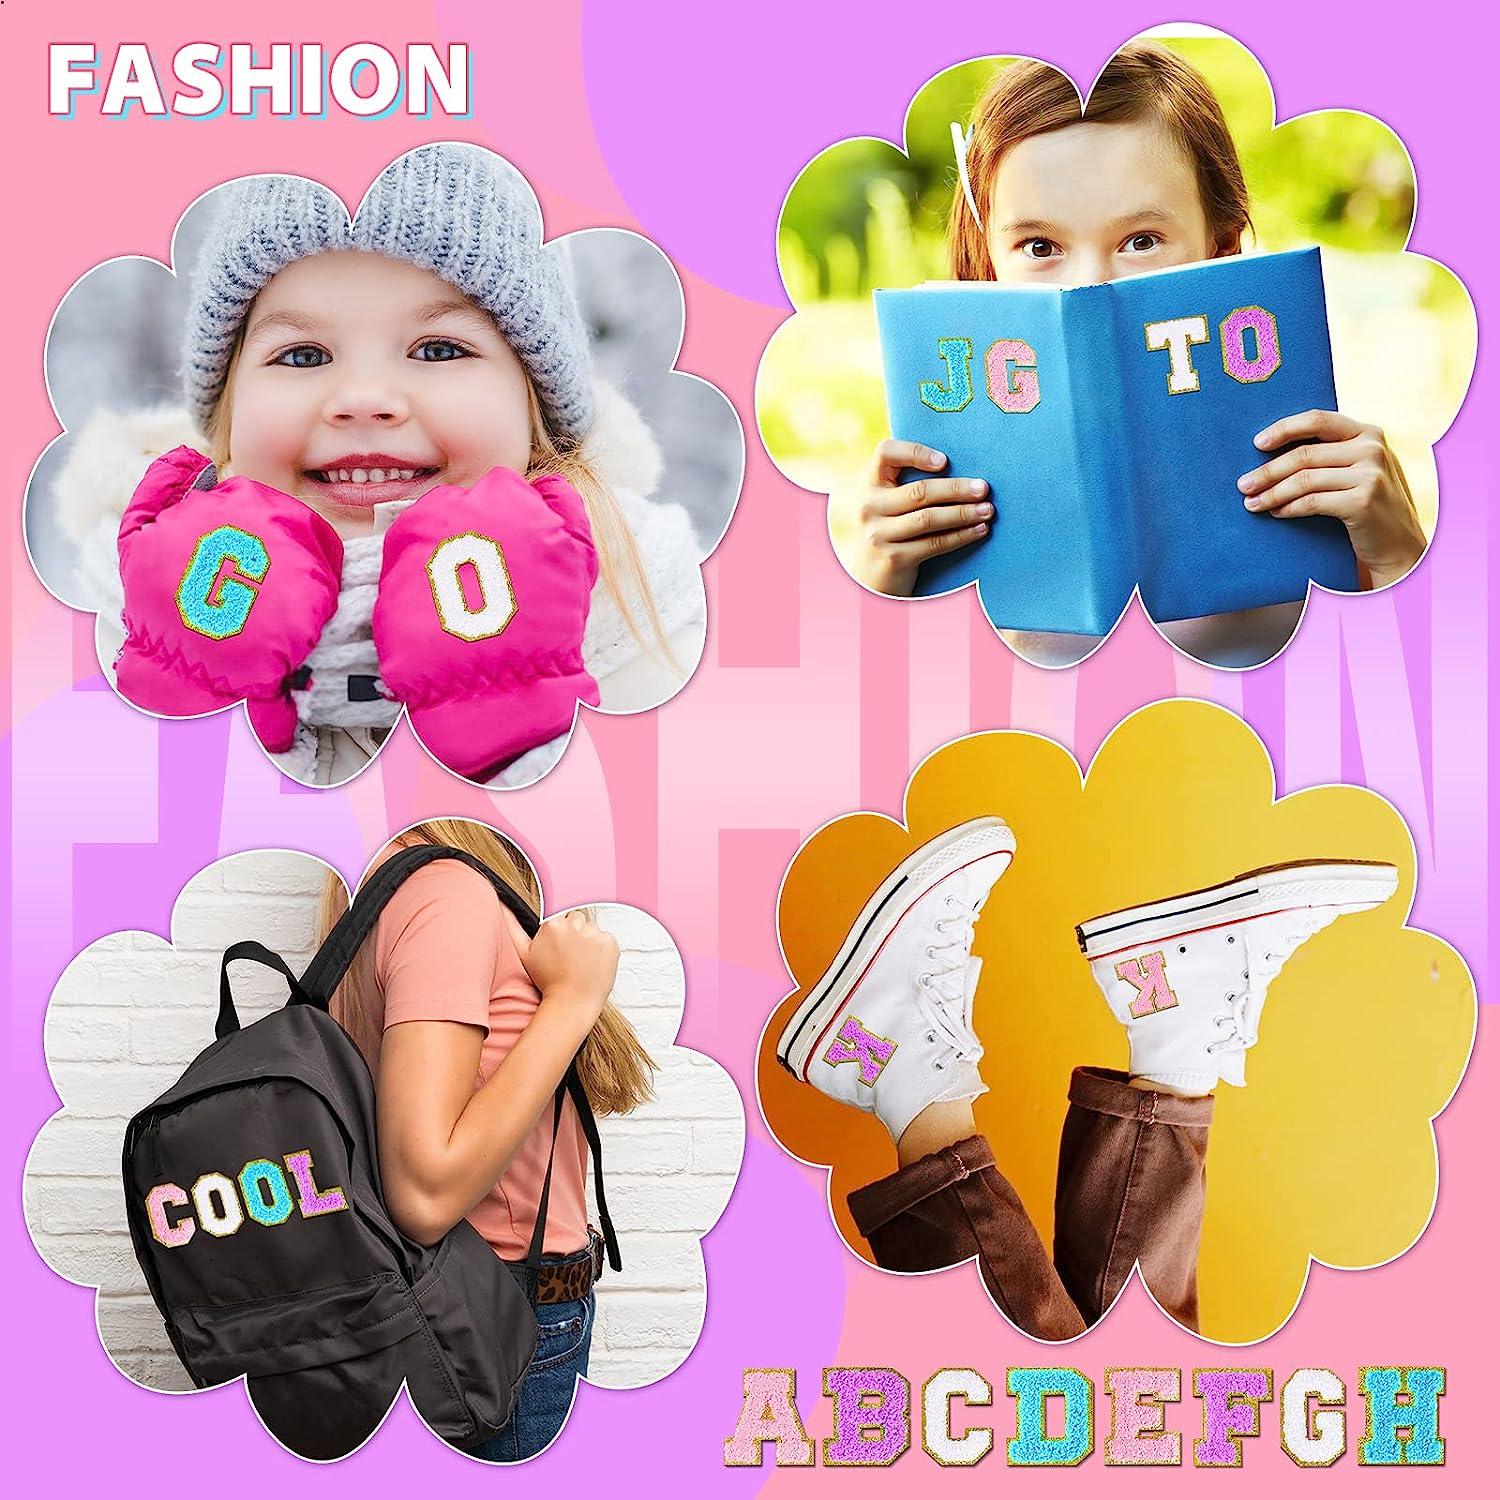 Iron on Letters for Clothing Letter Patches Iron on Patches Varsity Letter Patches Chenille Letter Patches Pink Iron on Letters for Backpacks